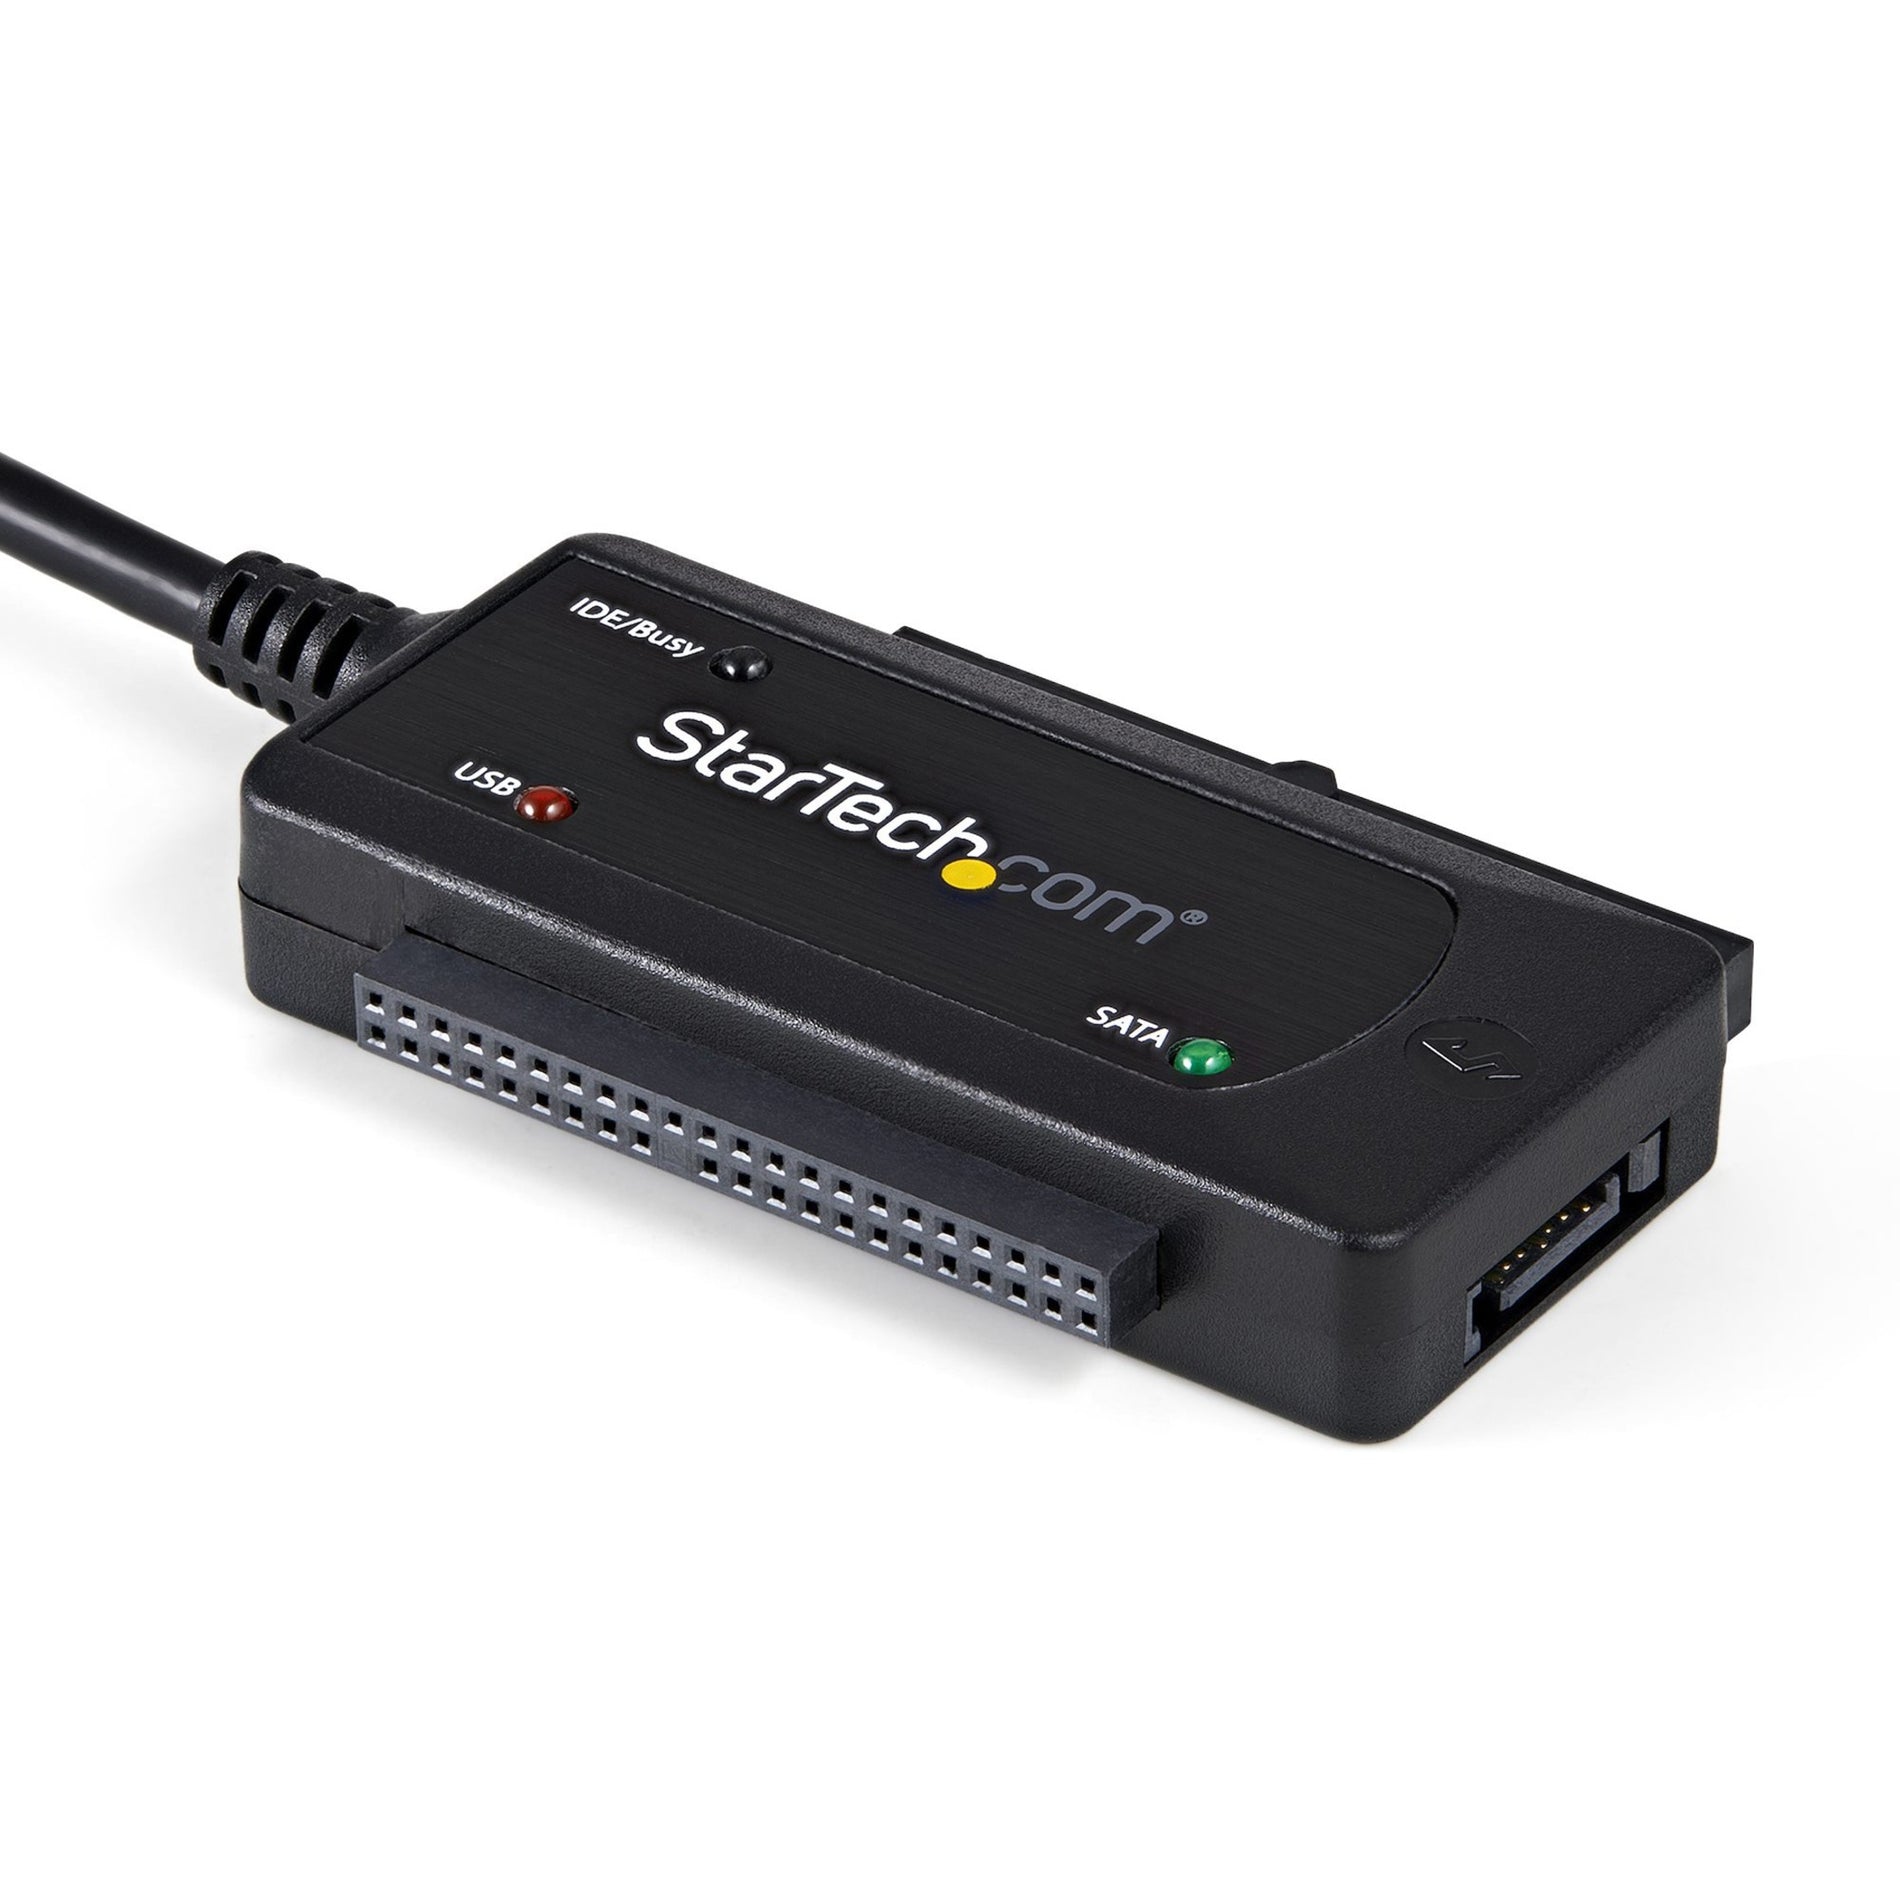 StarTech.com USB2SATAIDE USB 2.0 to SATA/IDE Combo Adapter for 2.5/3.5" SSD/HDD, Copy, Backup, or Transfer Data